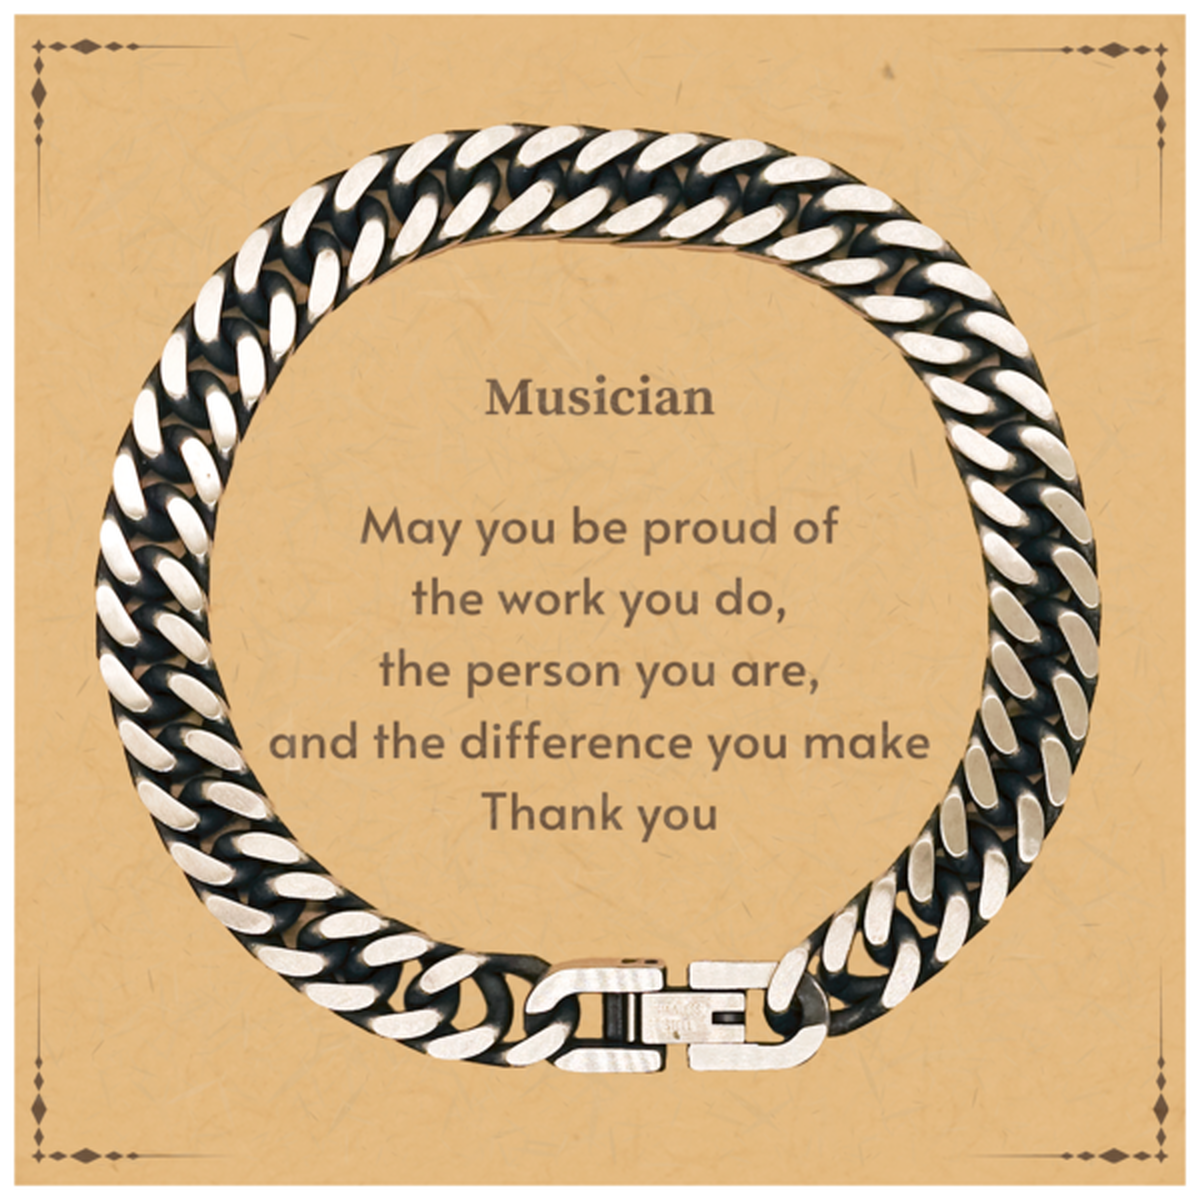 Heartwarming Cuban Link Chain Bracelet Retirement Coworkers Gifts for Musician, Musician May You be proud of the work you do, the person you are Gifts for Boss Men Women Friends